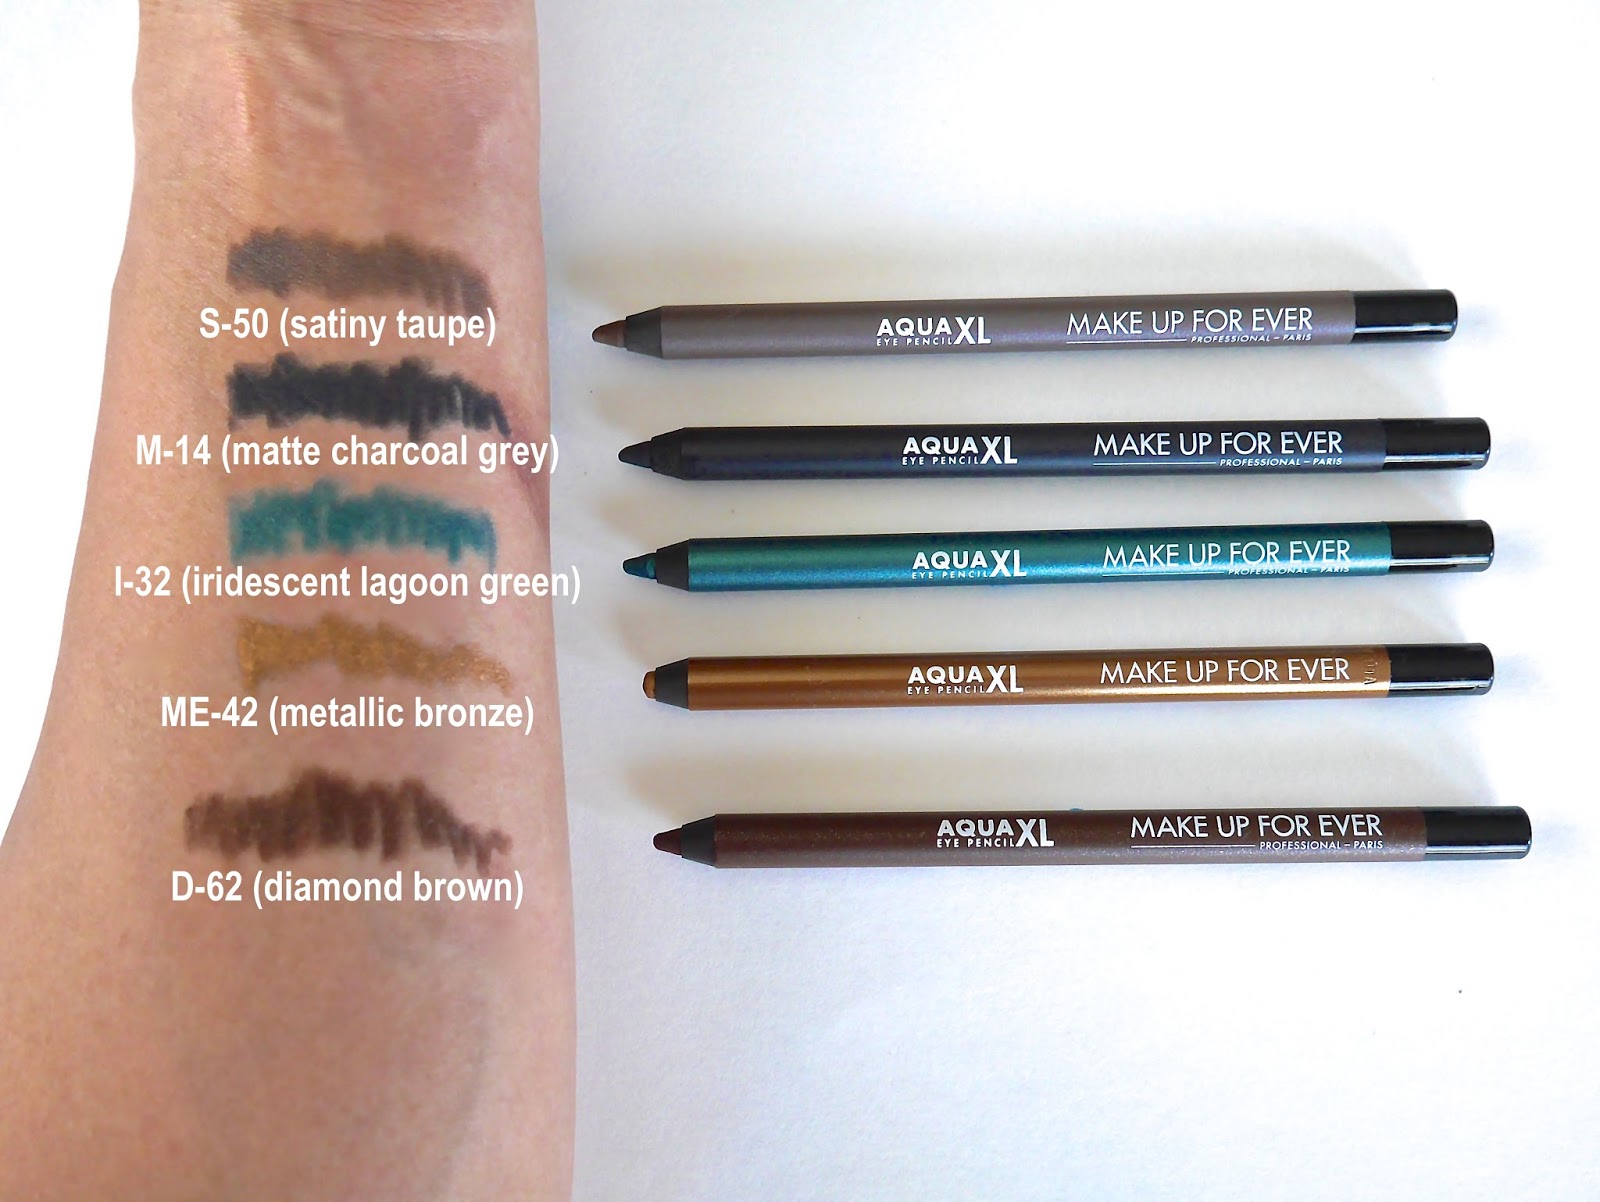 REVIEW: Make Up For Ever Aqua XL Eye Pencil Waterproof Eyeliner / Reflection Sanity